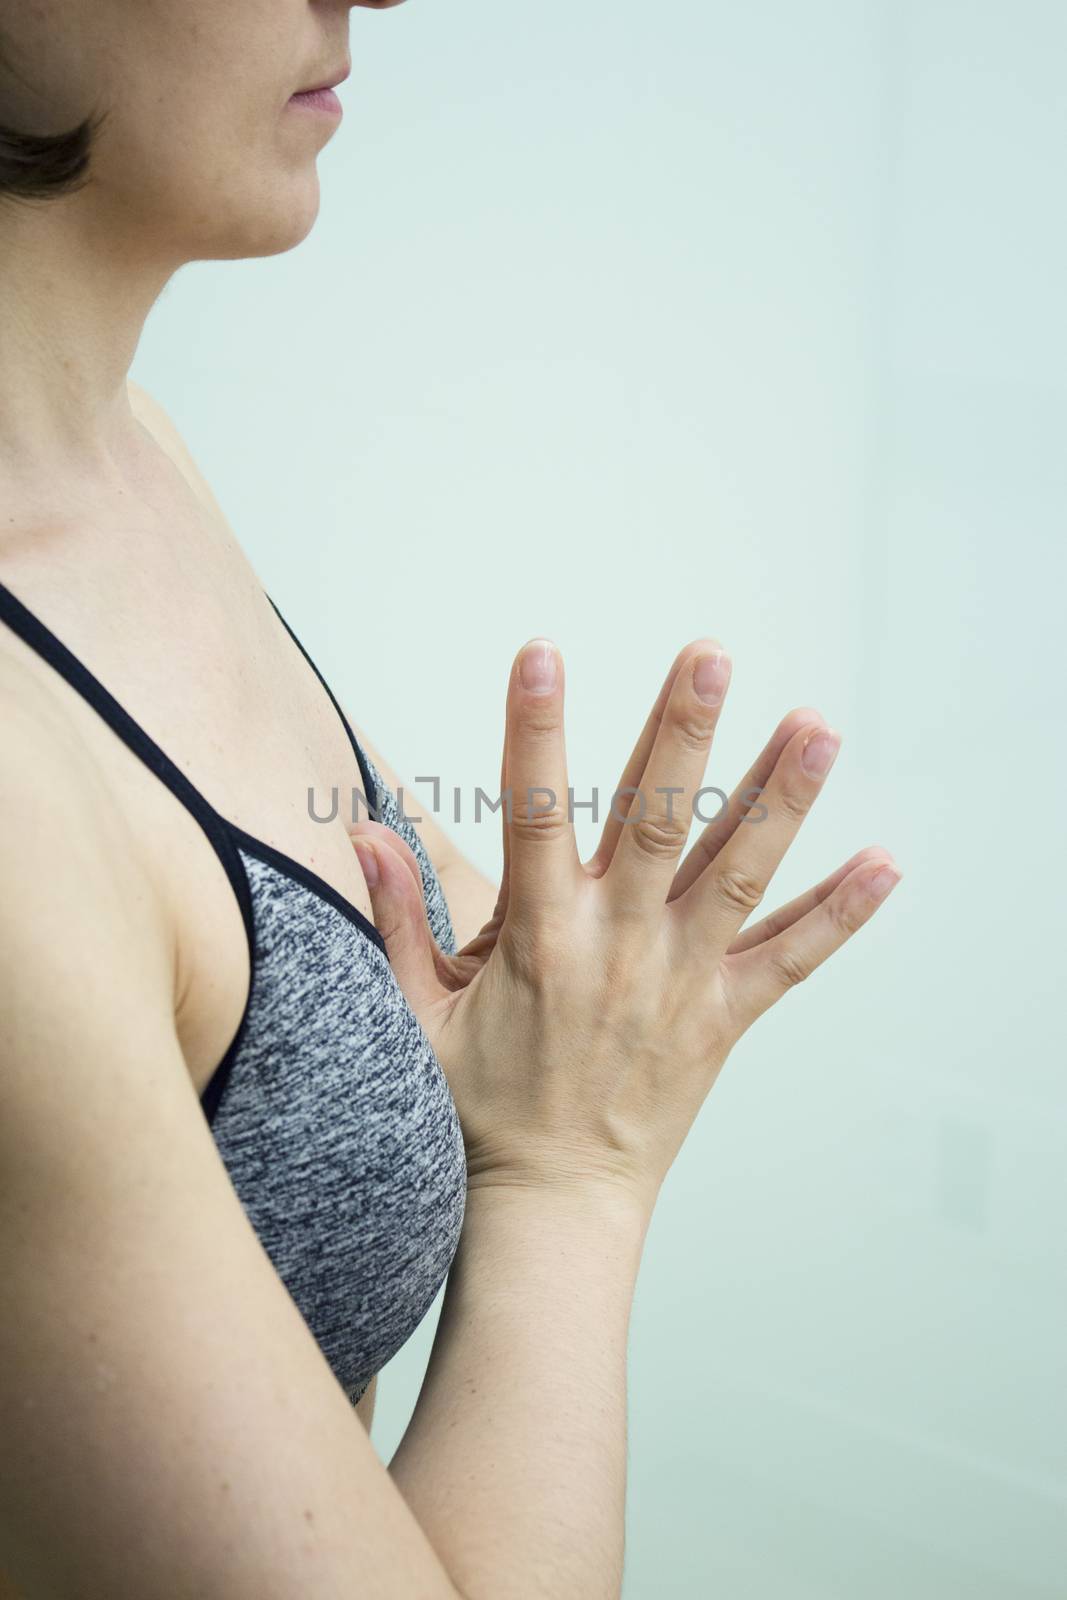 Womans hands practicing yoga and meditation positions by GemaIbarra